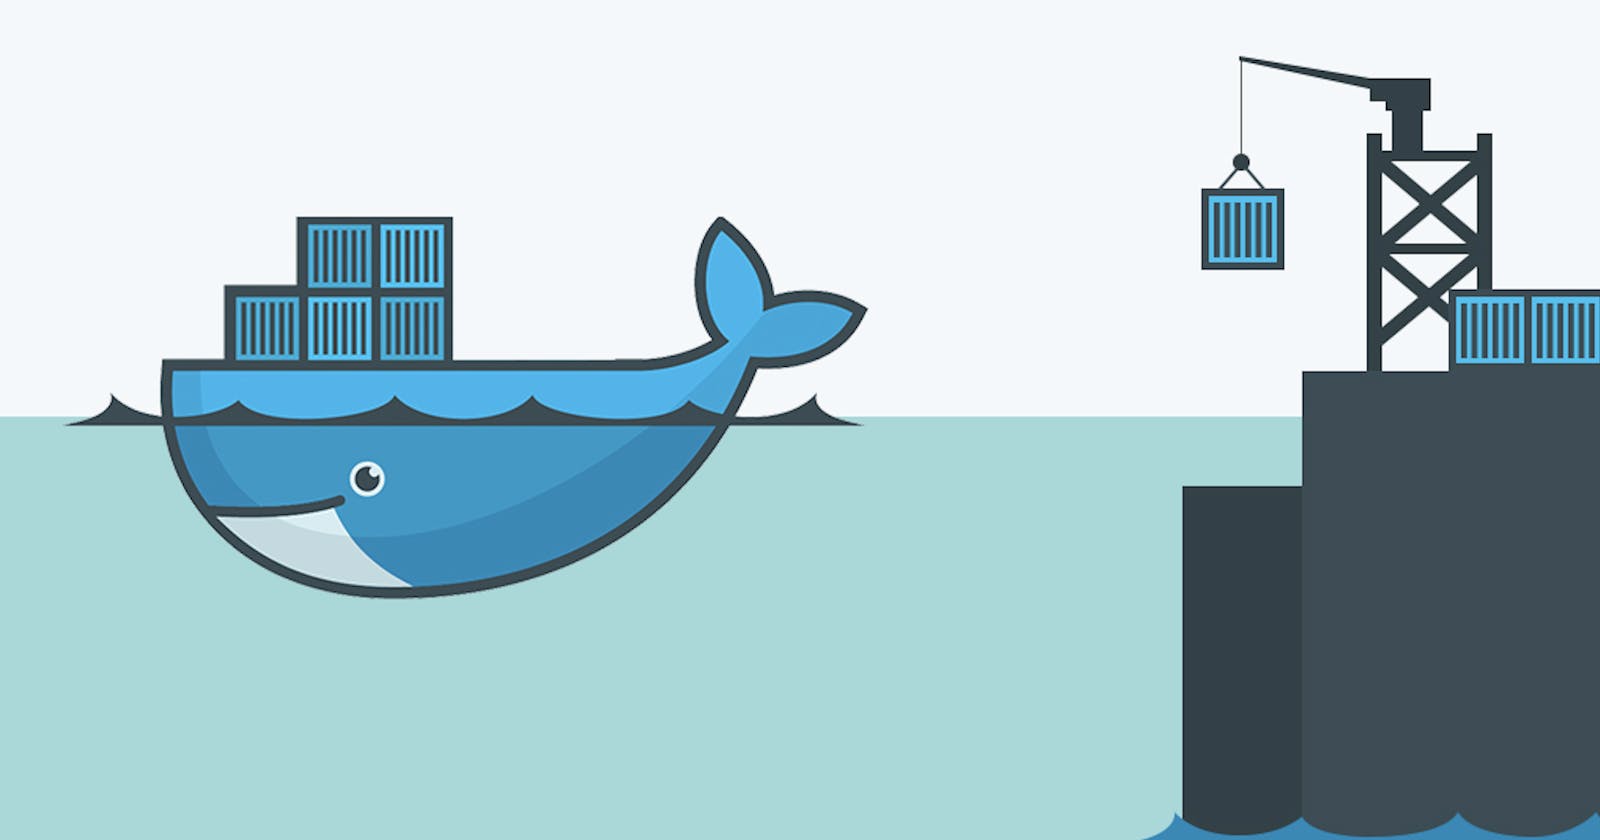 Working with Docker